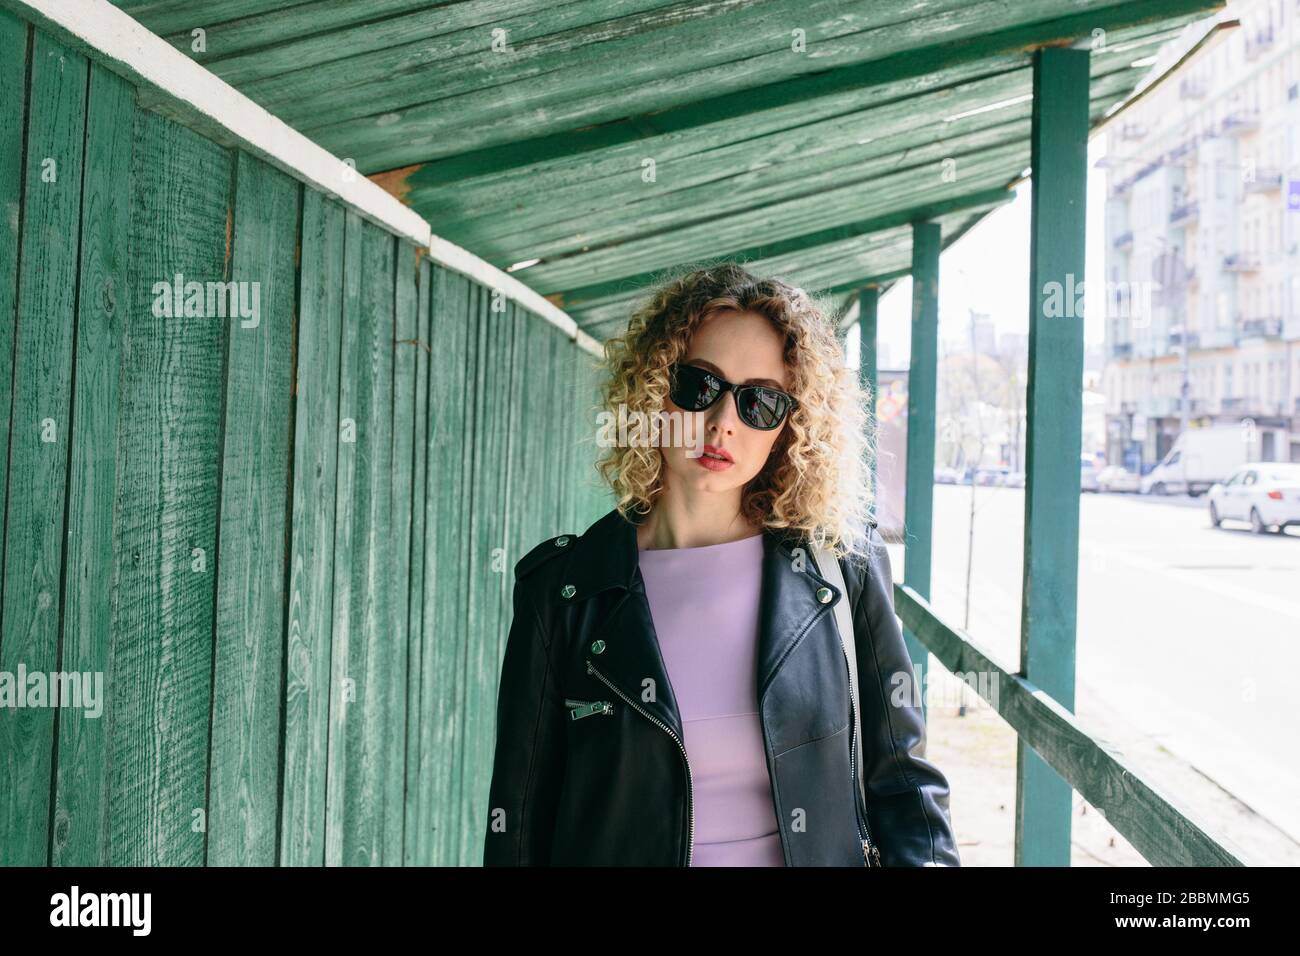 Portrait of beautiful women with curly long hair in black leather jacket and violet dress and black sun glasses in the green building transition Stock Photo